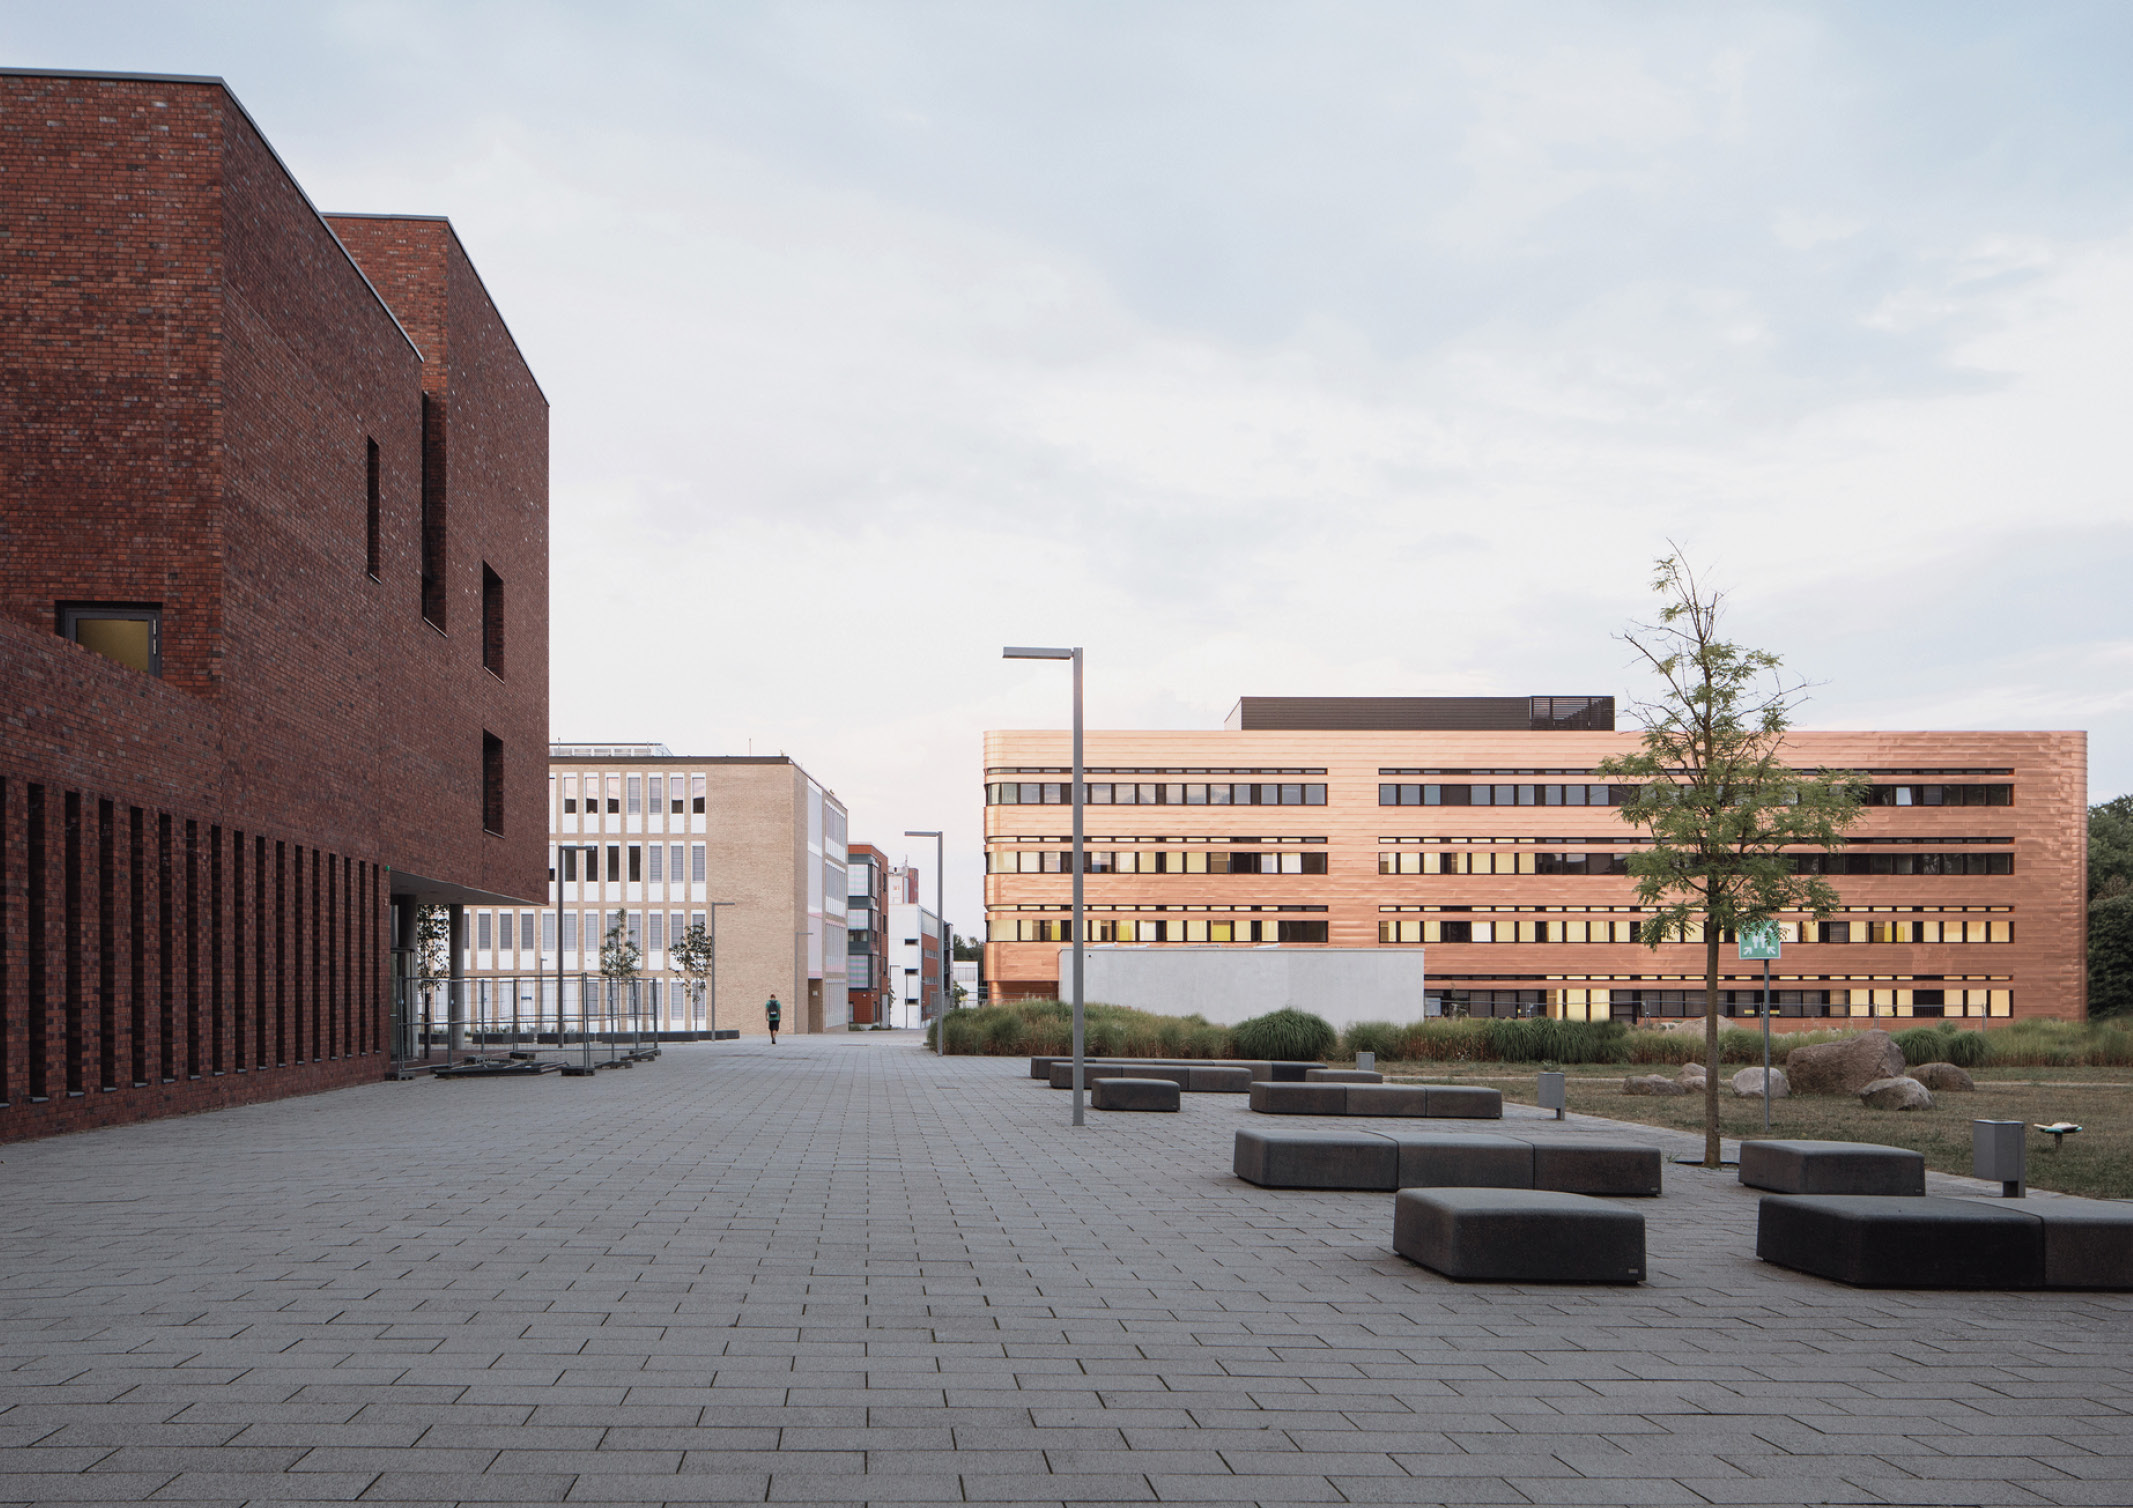 Sehw Architektur Institute of Electrical Engineering at the University of Rostock